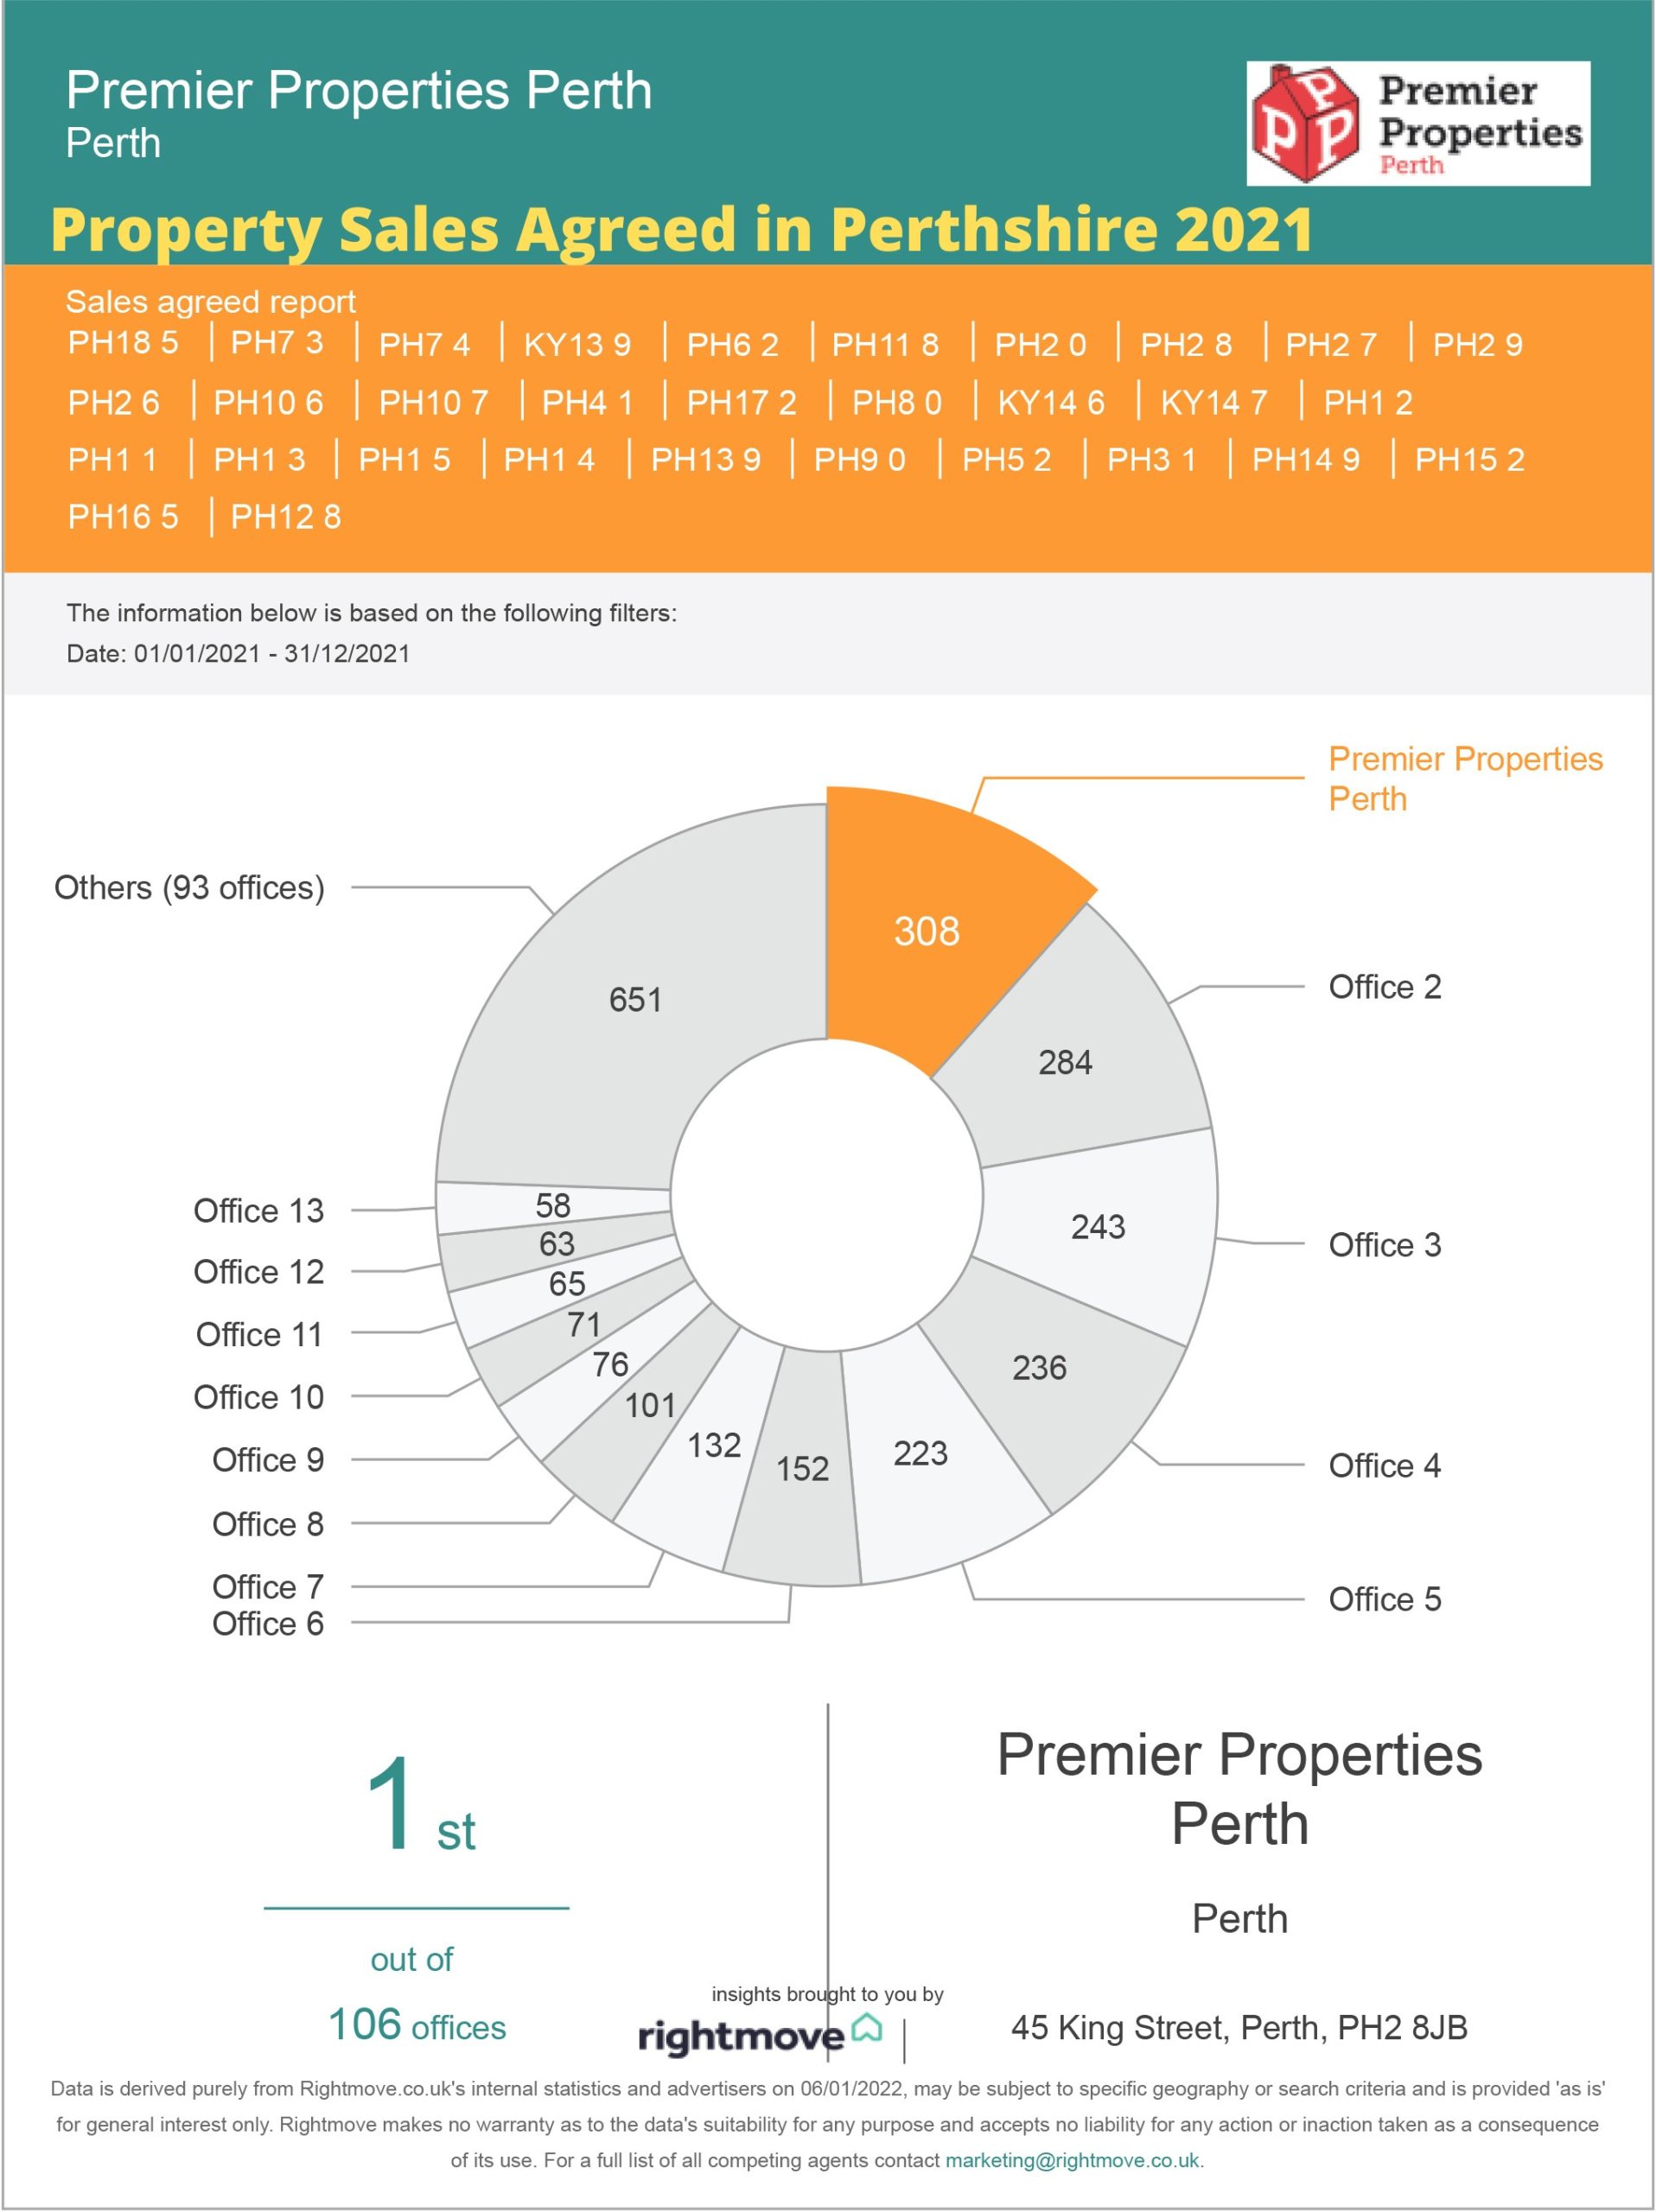 Property Sales Agreed in Perthshire 2021 (1)